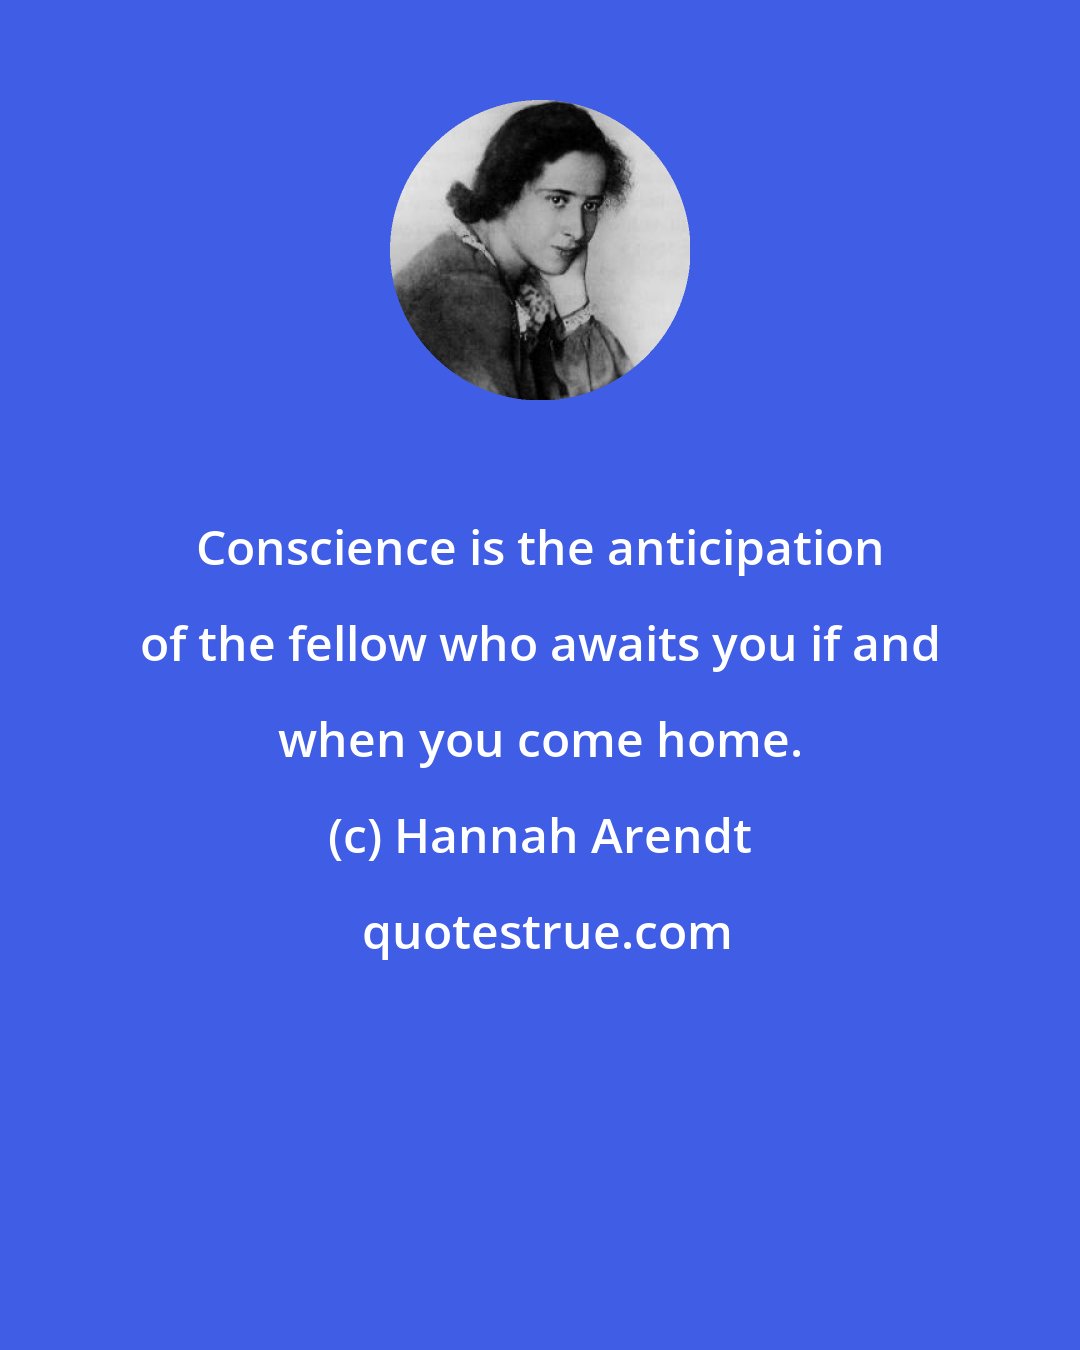 Hannah Arendt: Conscience is the anticipation of the fellow who awaits you if and when you come home.